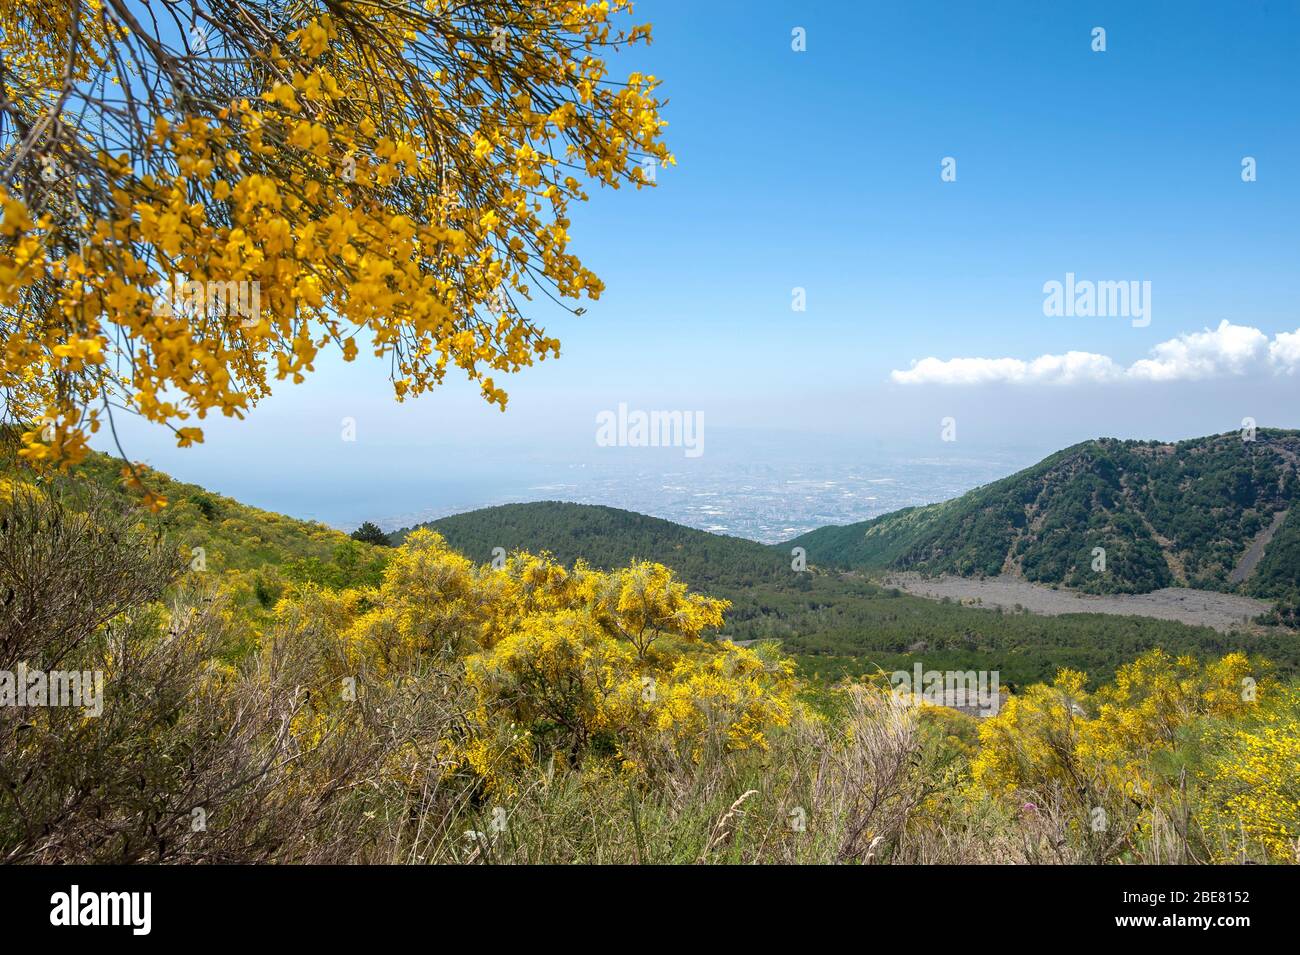 Yellow flowers of the Etna broom (Genista aetnensis) flowering on the slopes of Mount Vesuvius, Italy Stock Photo